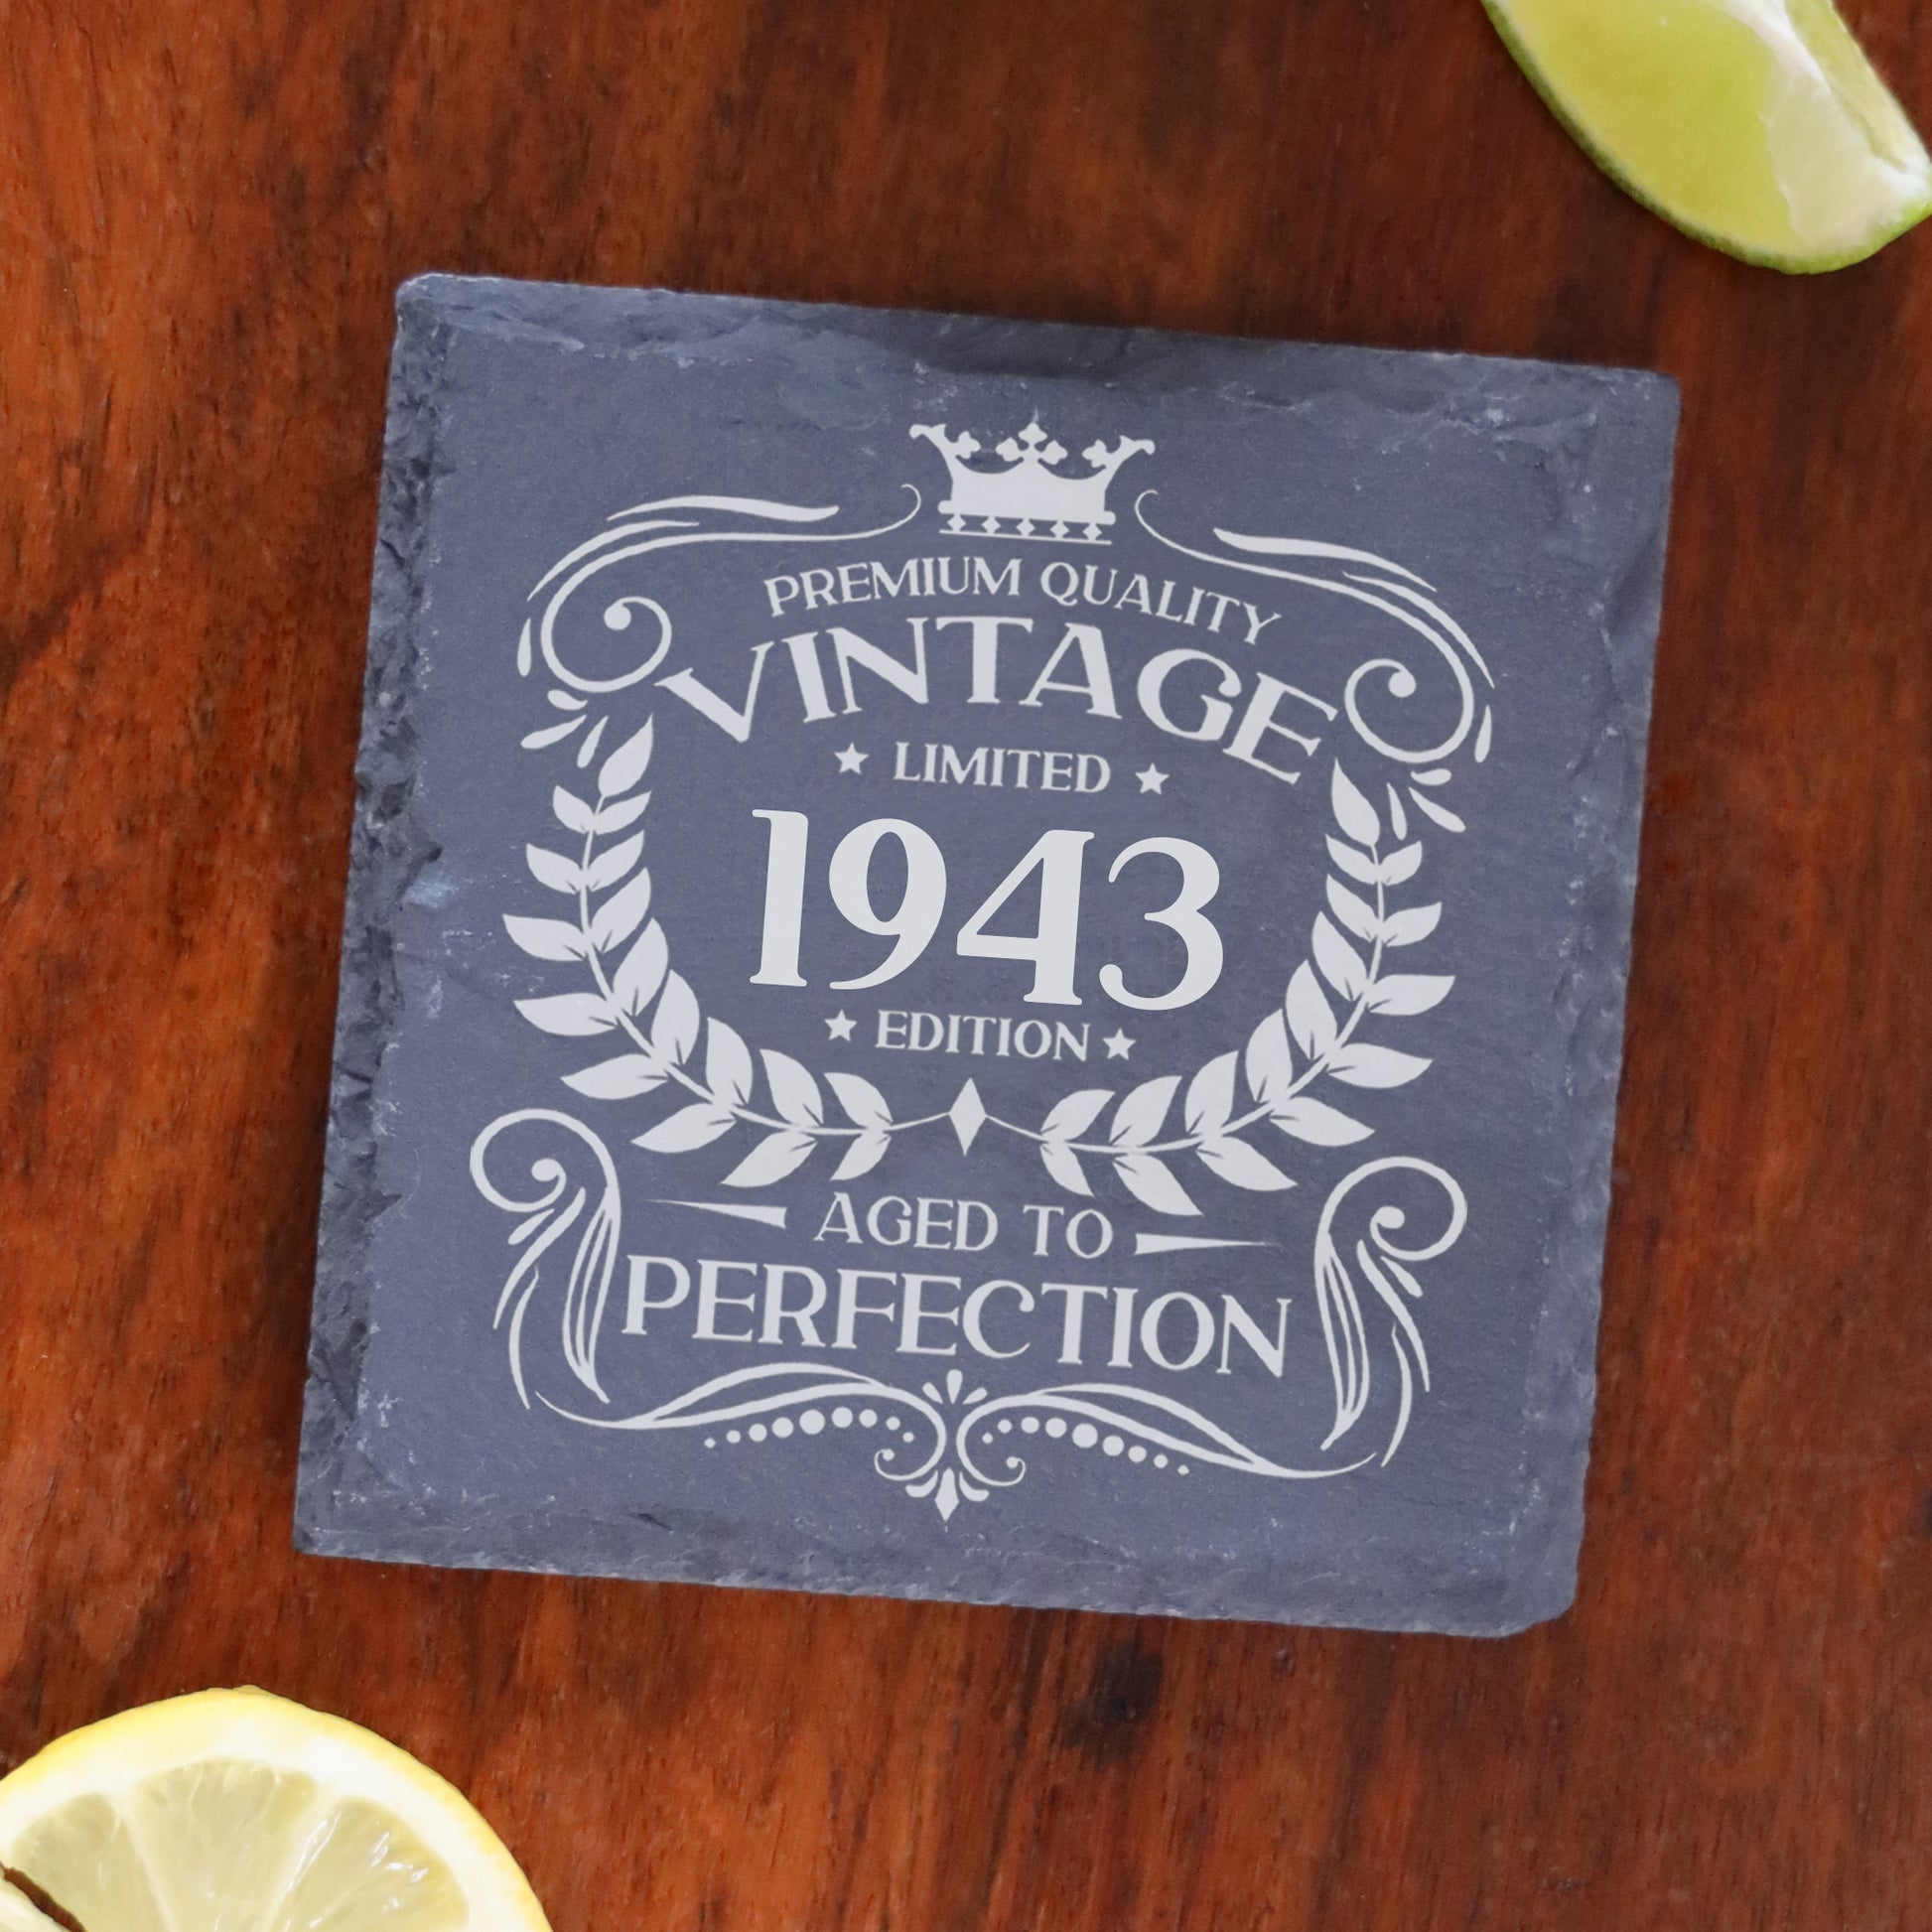 Personalised Vintage 1943 Mug and/or Coaster  - Always Looking Good - Square Coaster On Its Own  